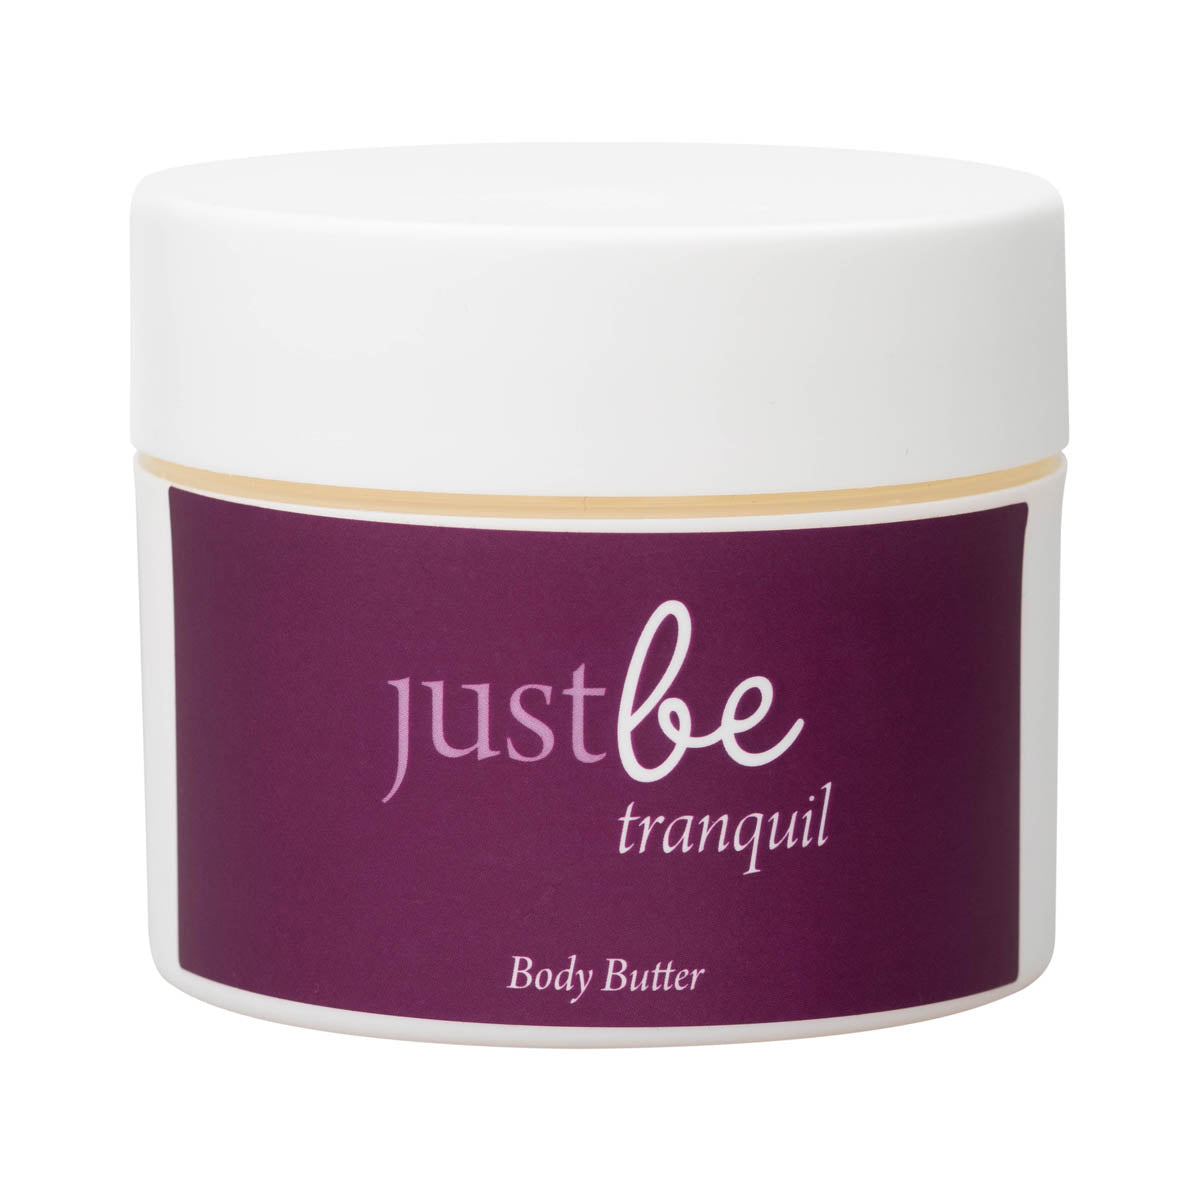 Tranquil Body Butter